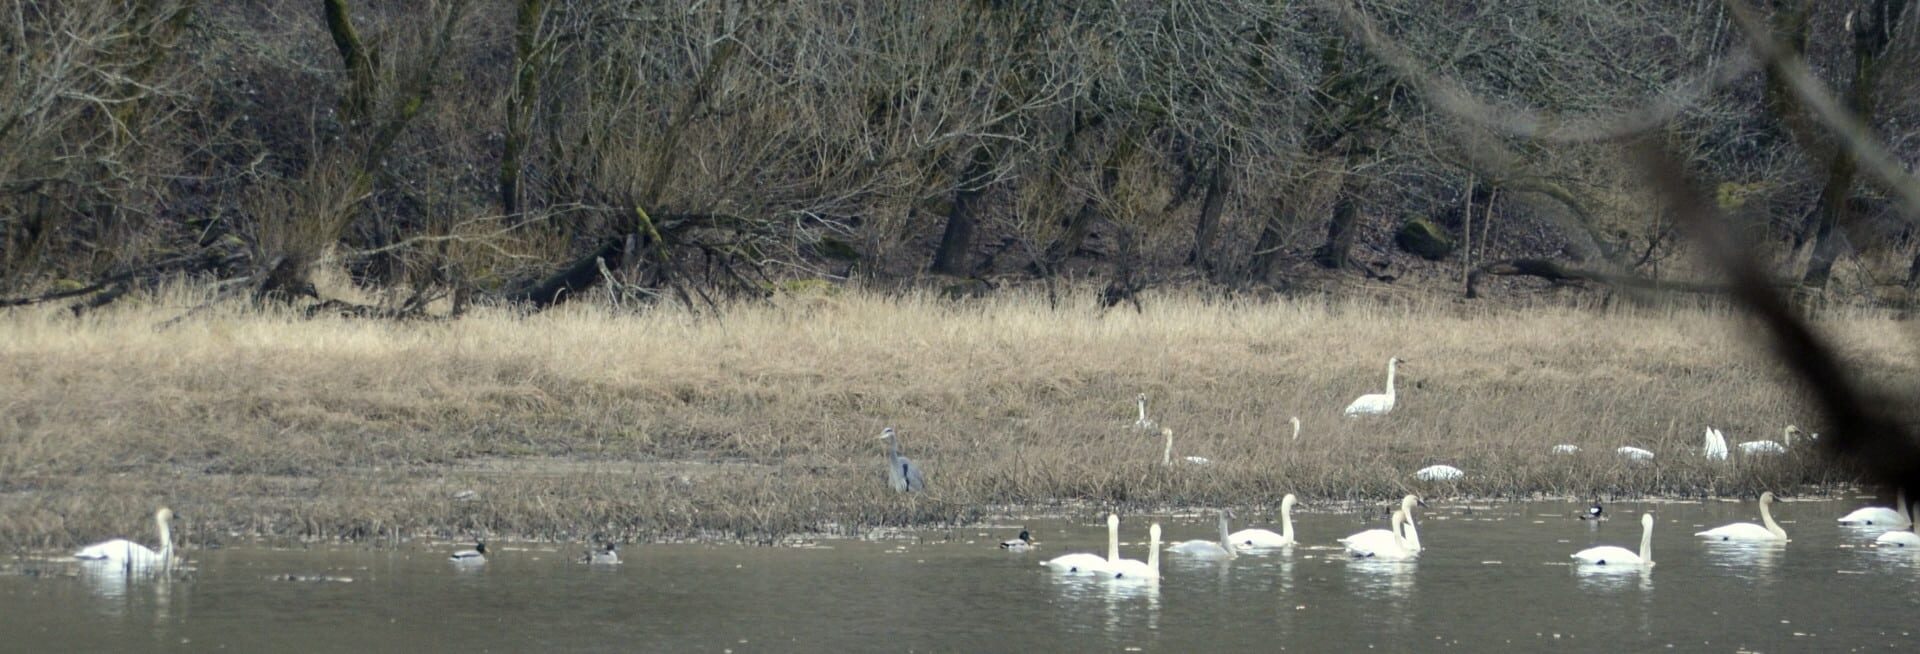 Tundra Swans in the Columbia River Gorge